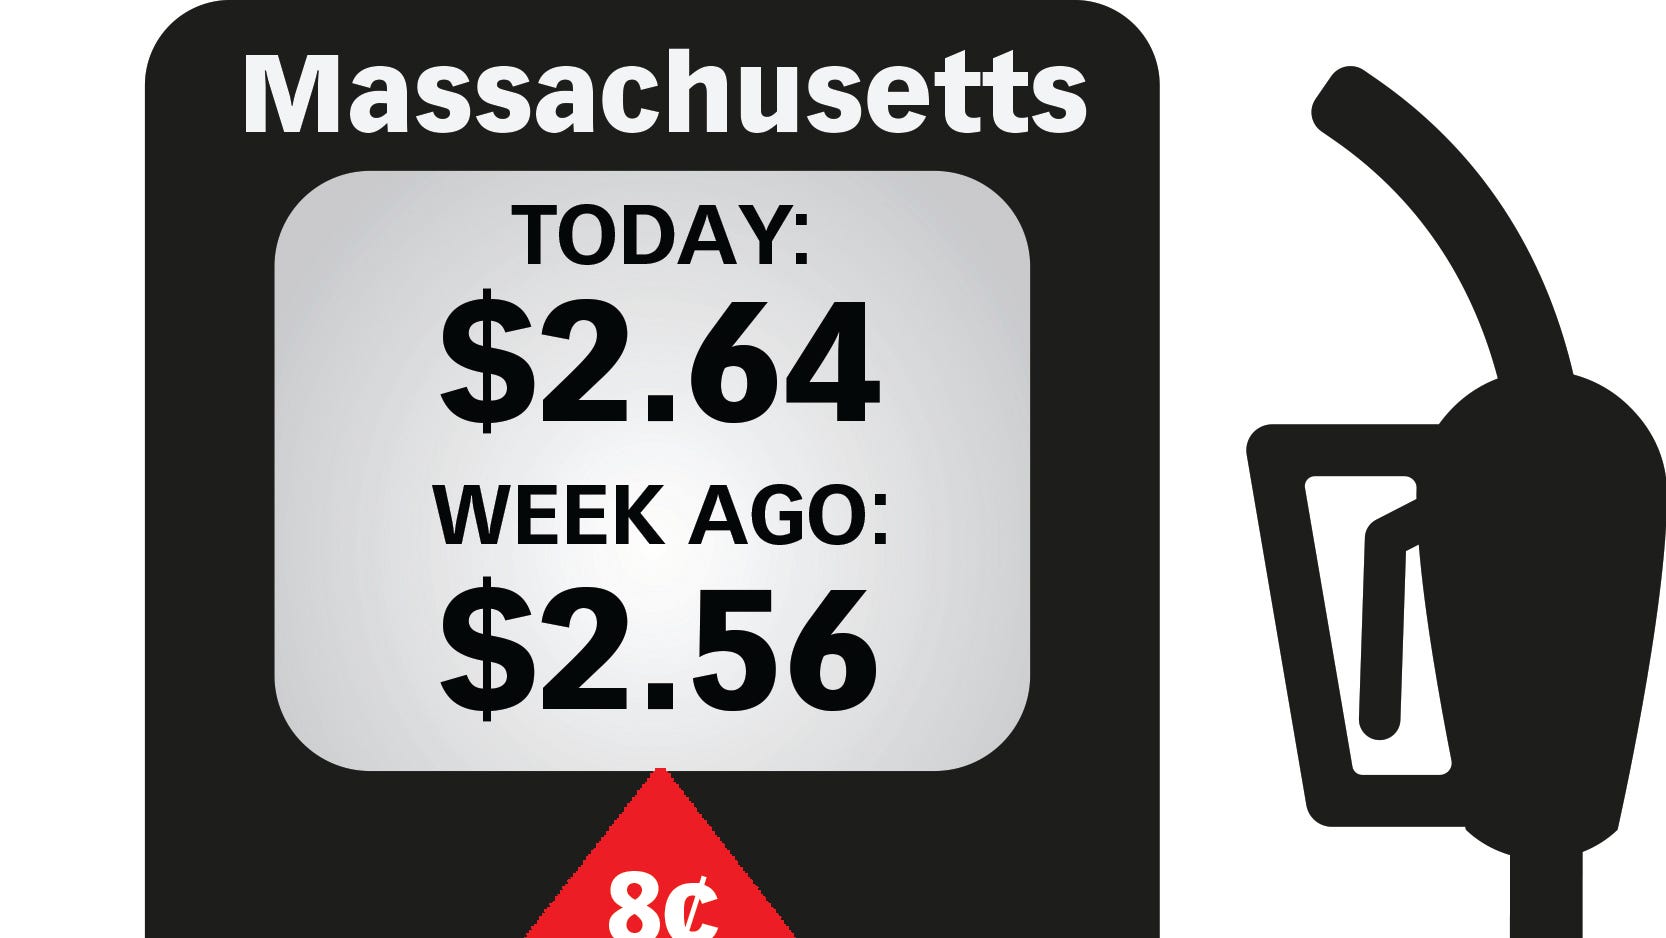 average-price-of-gas-in-massachusetts-is-2-64-up-44-cents-in-three-months